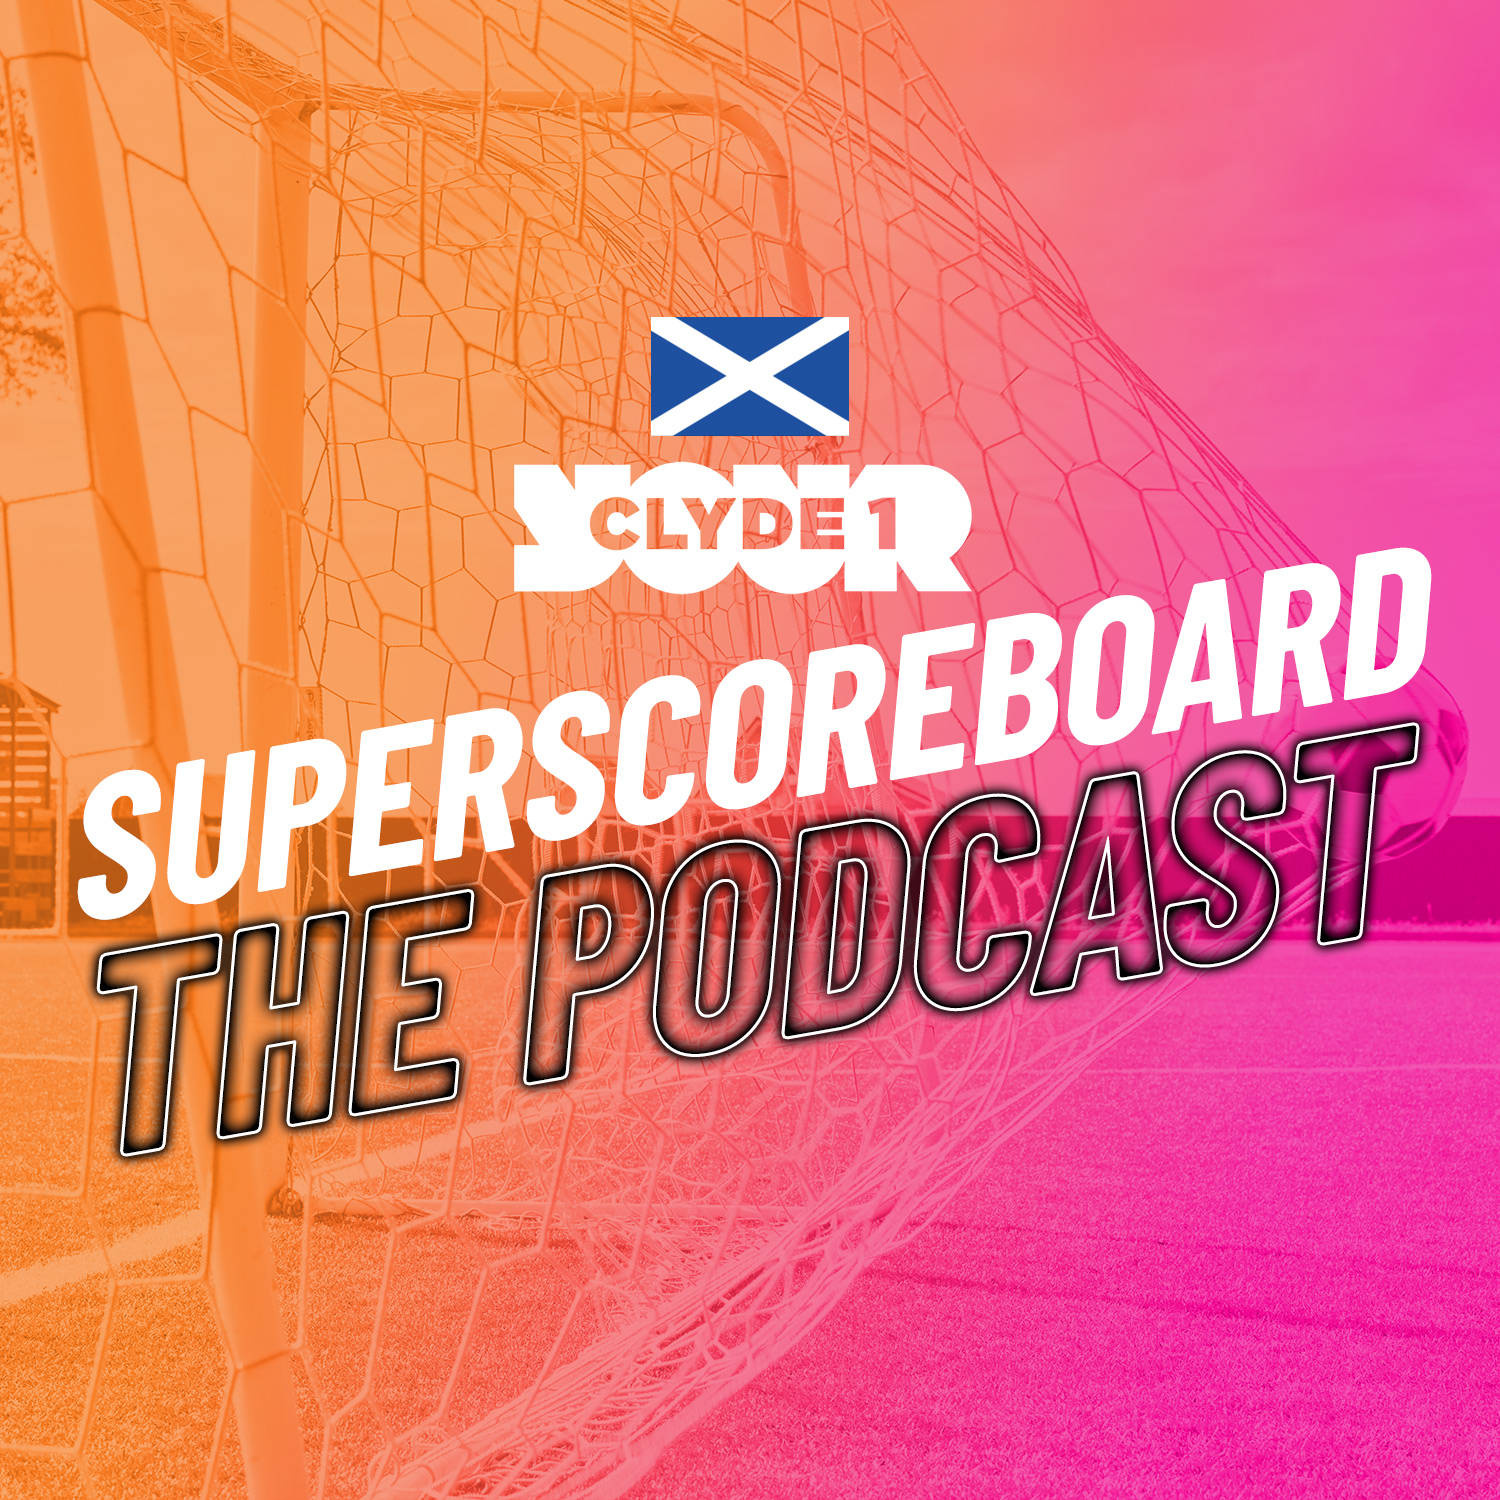 Monday 30th January Clyde 1 Superscoreboard